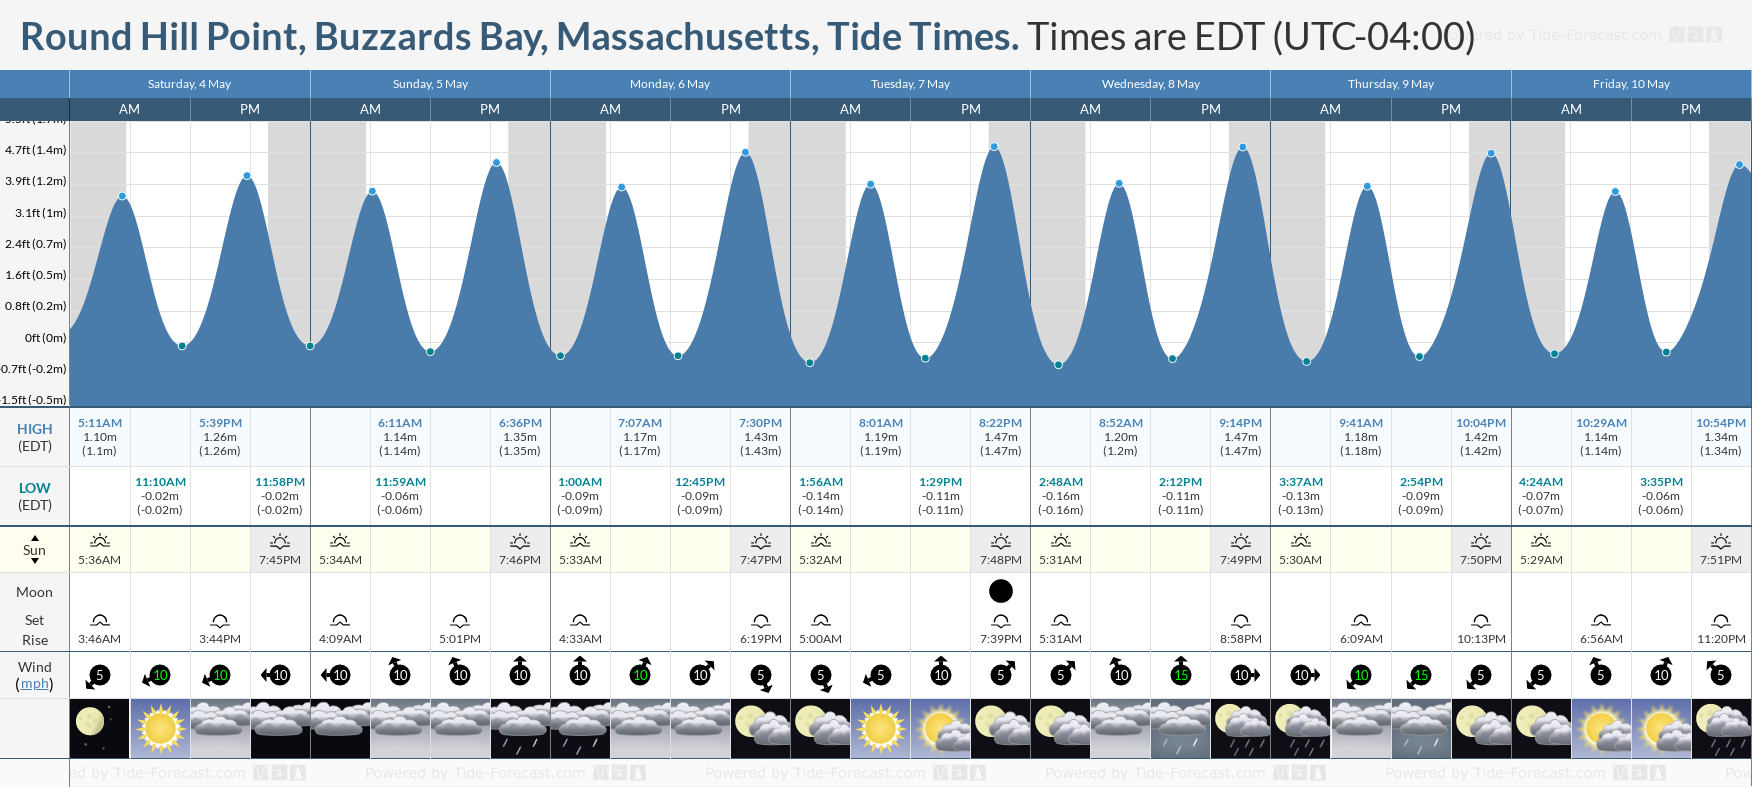 Round Hill Point, Buzzards Bay, Massachusetts Tide Chart including high and low tide tide times for the next 7 days